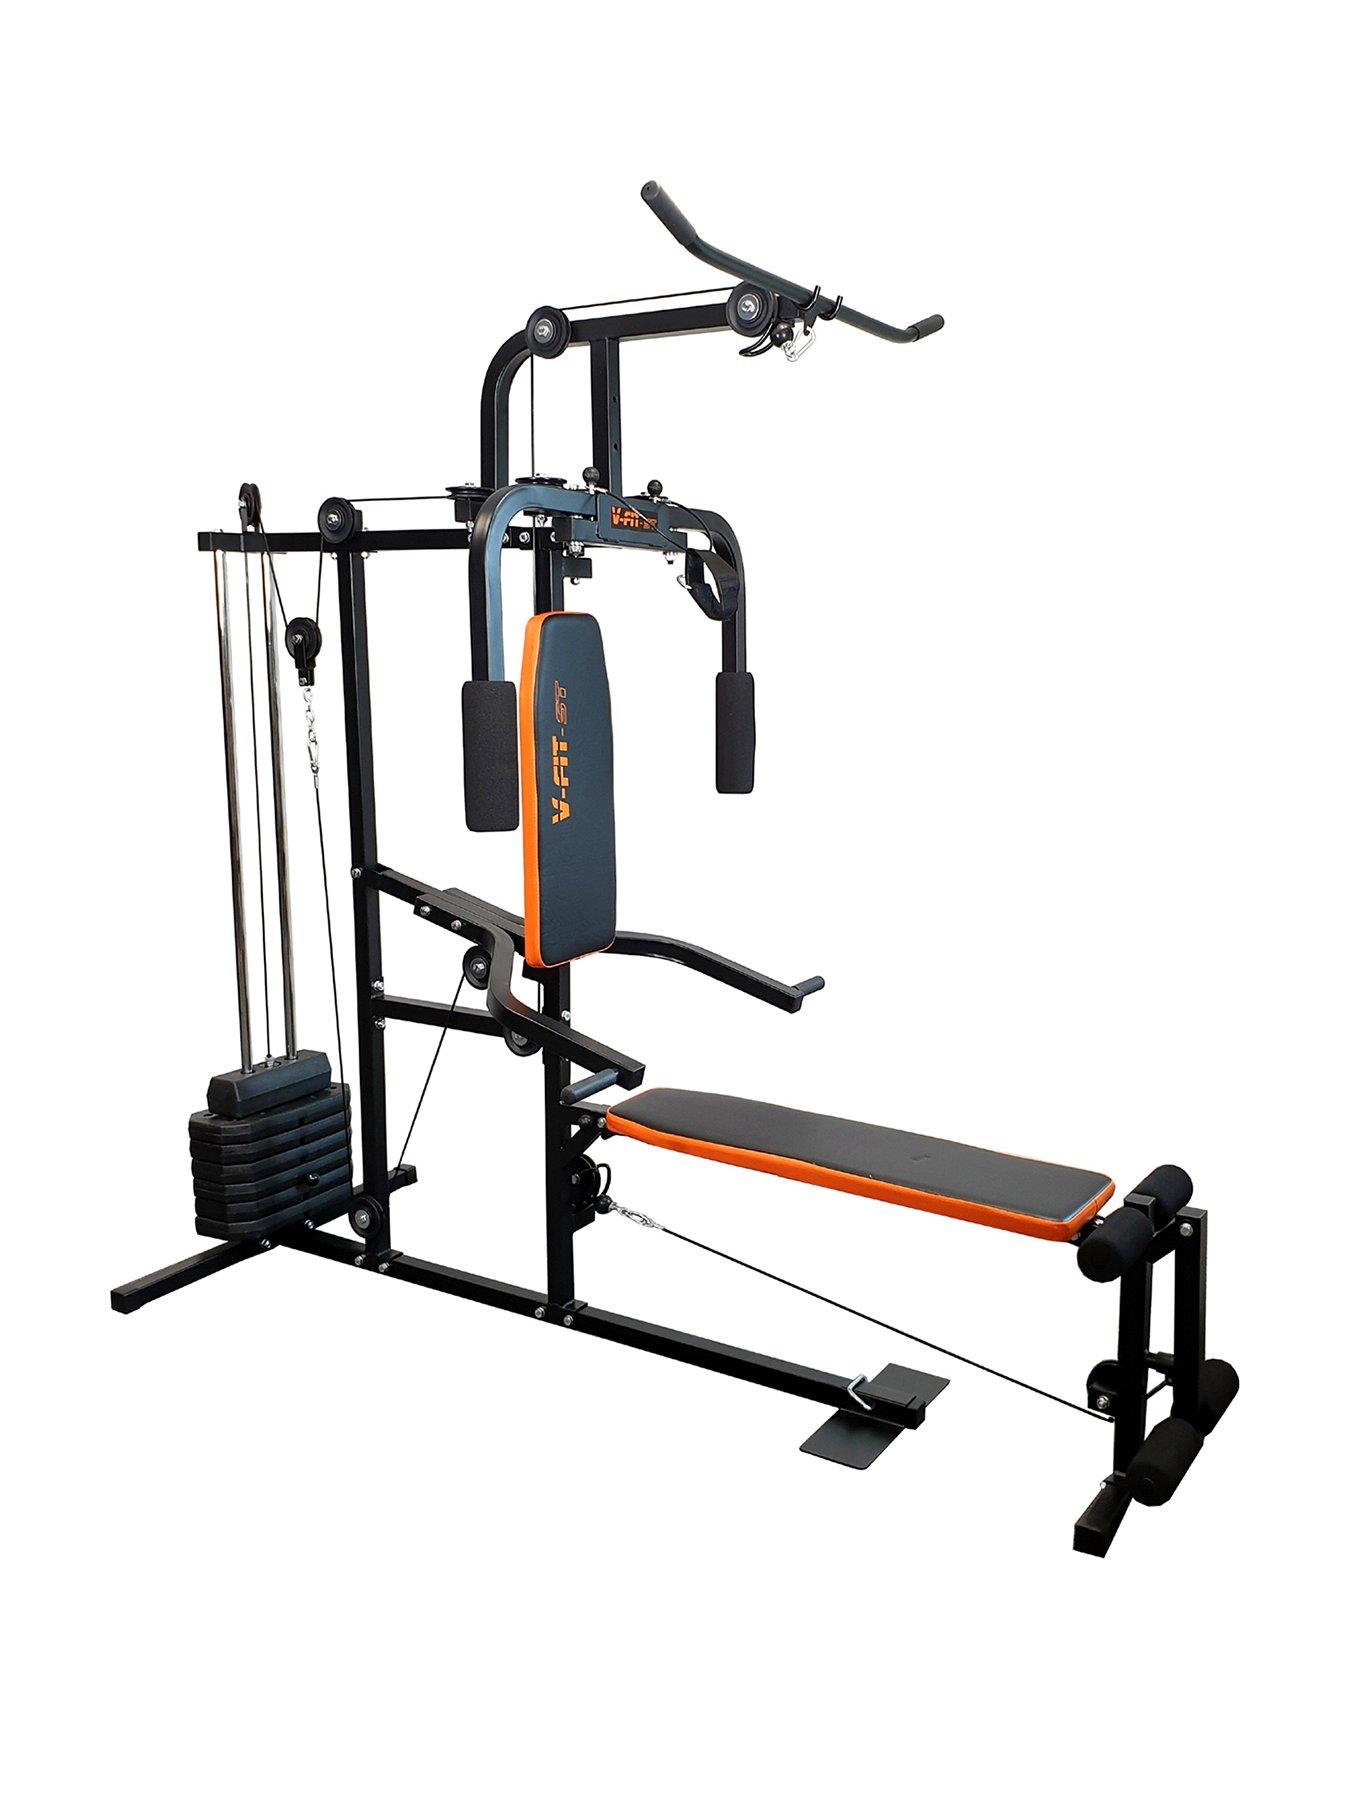 73 Recomended Home multi gym equipment ireland for Workout Everyday